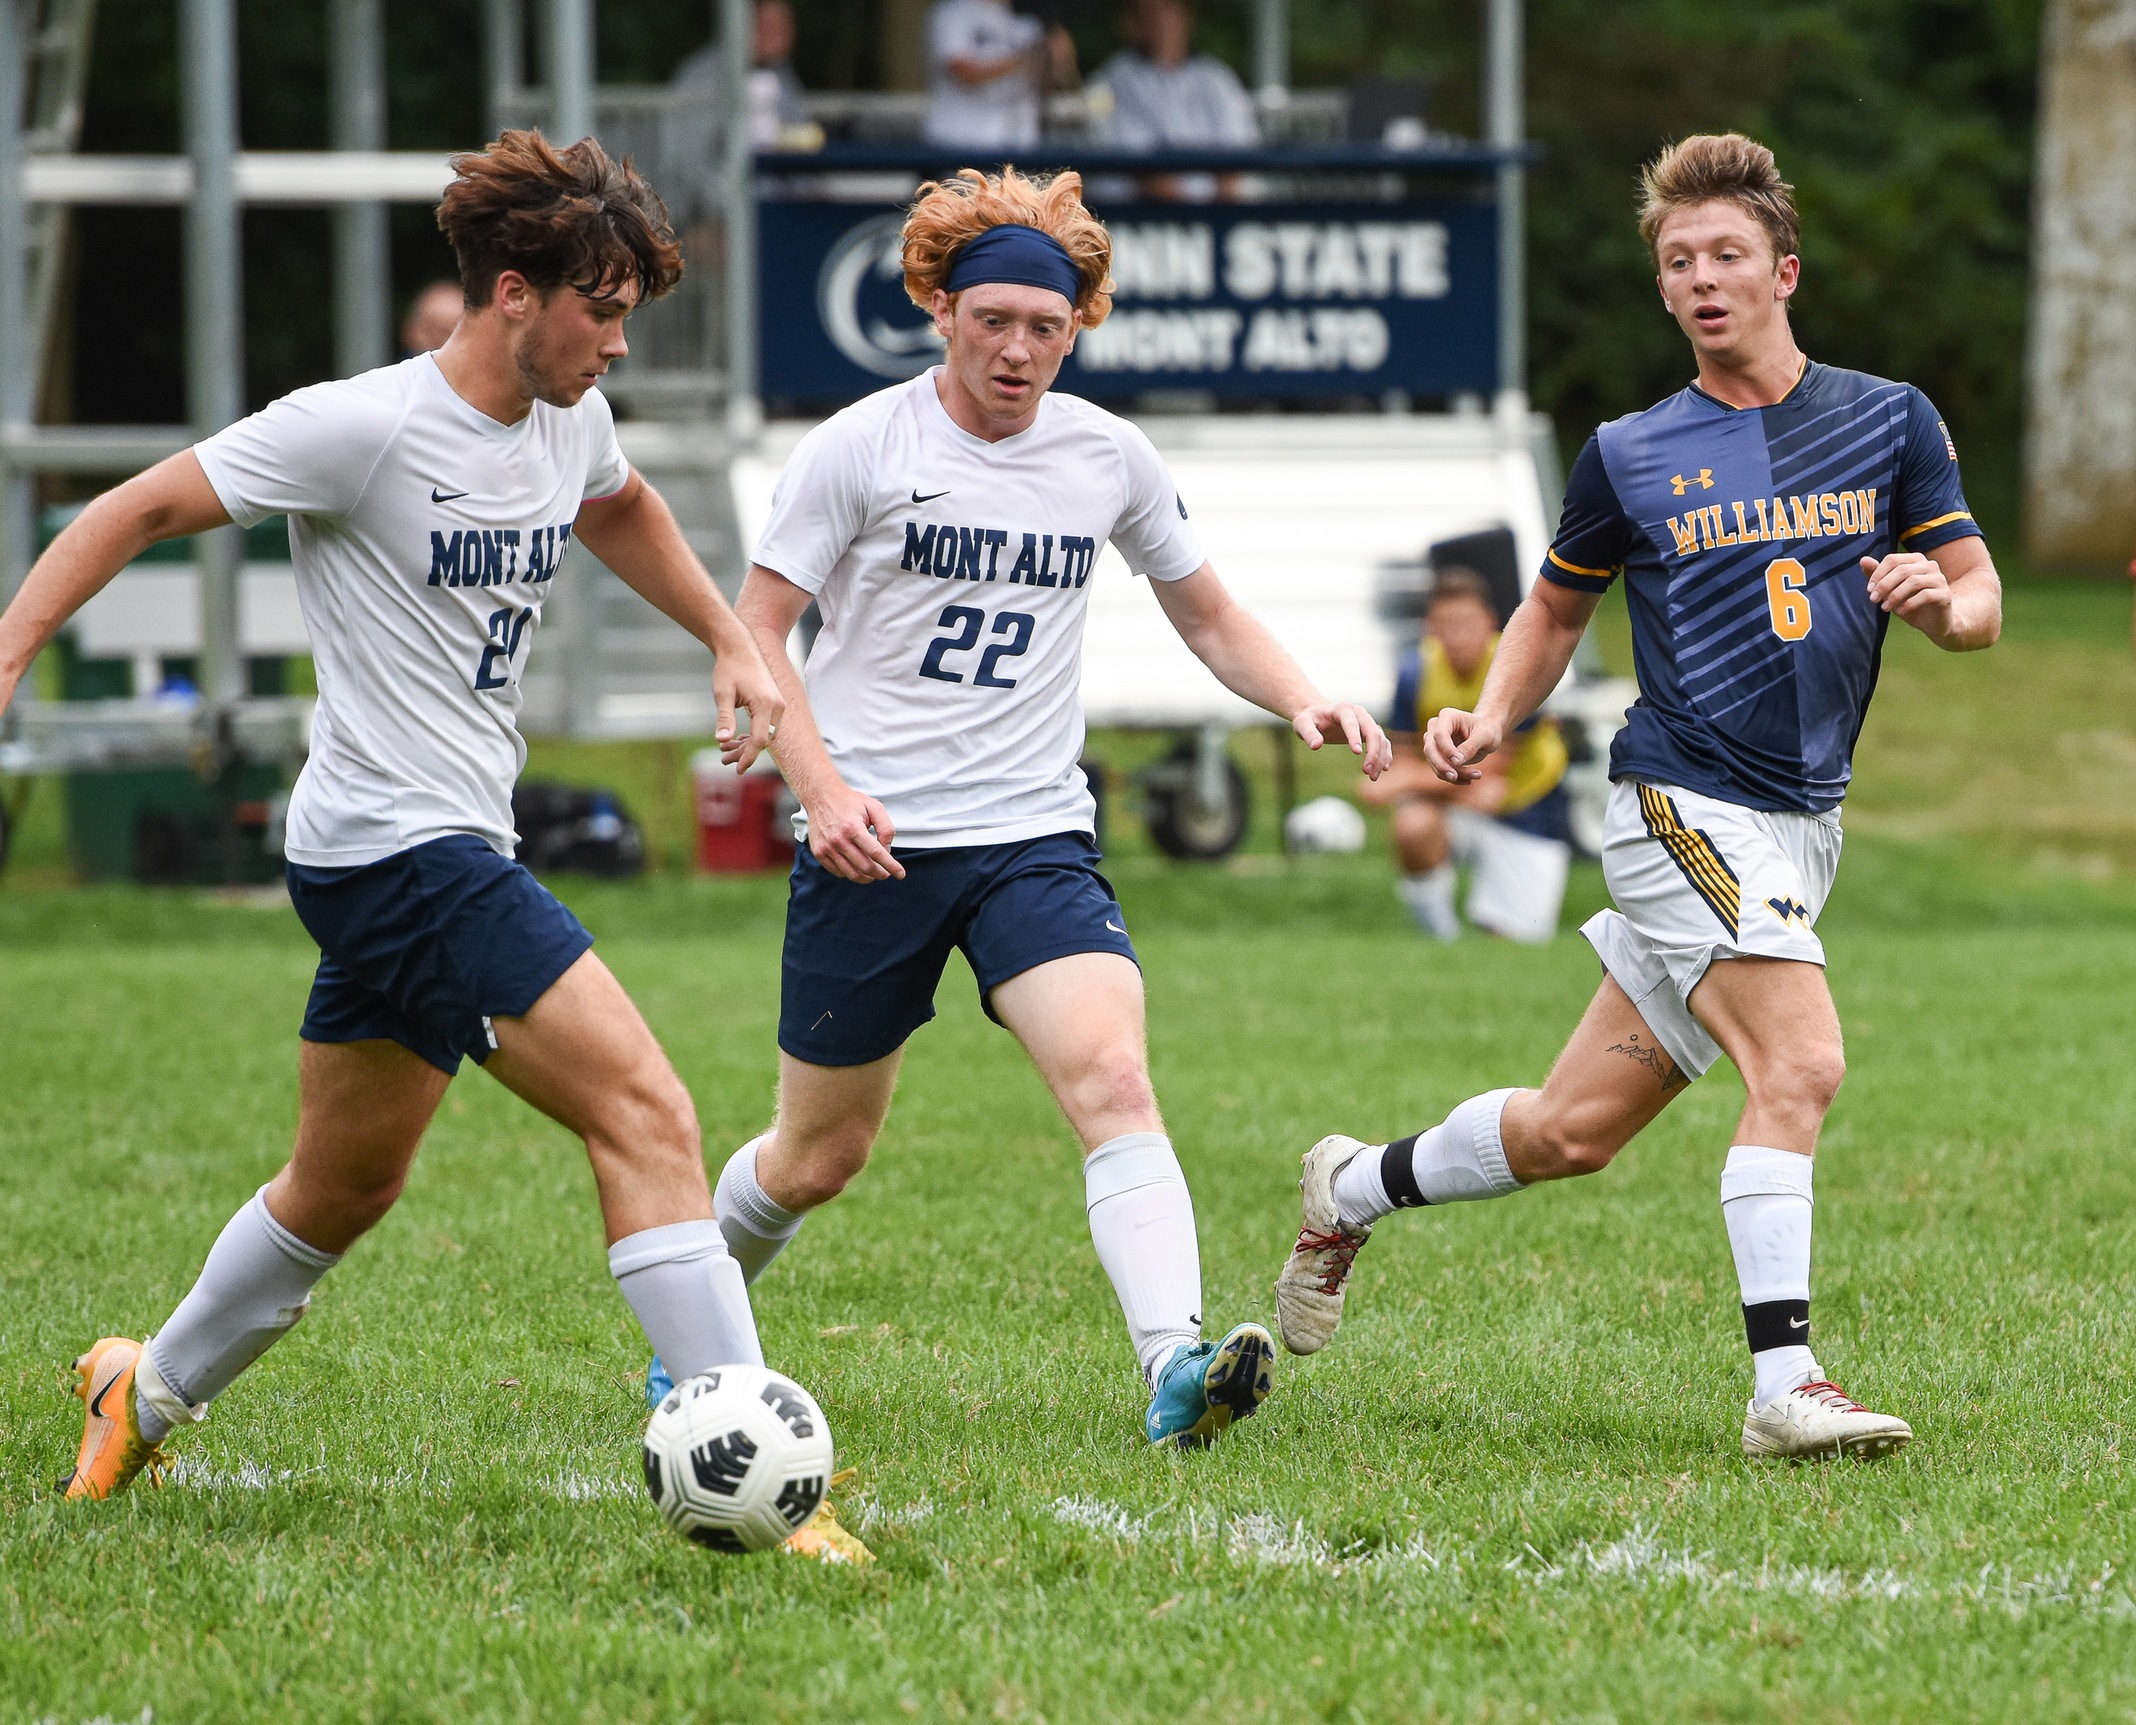 Men's soccer bows out in quarterfinals